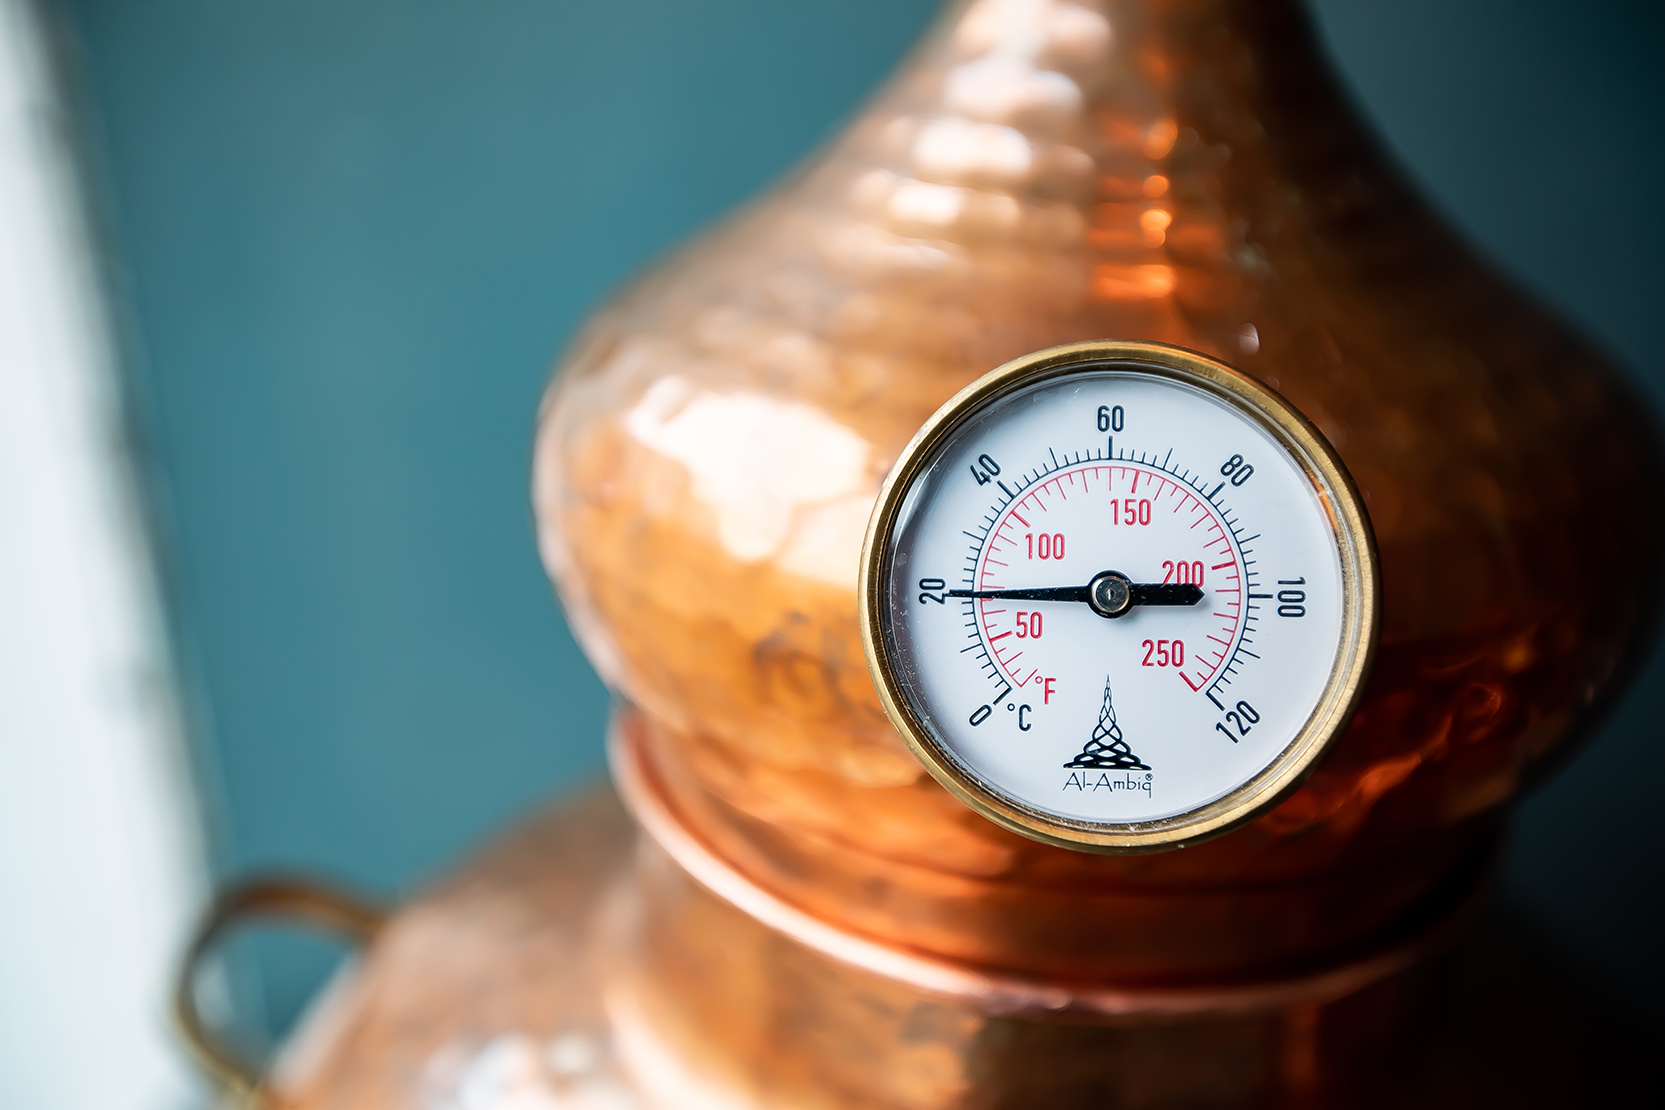 One of the small copper pot stills at Gyre & Gimble gin academy